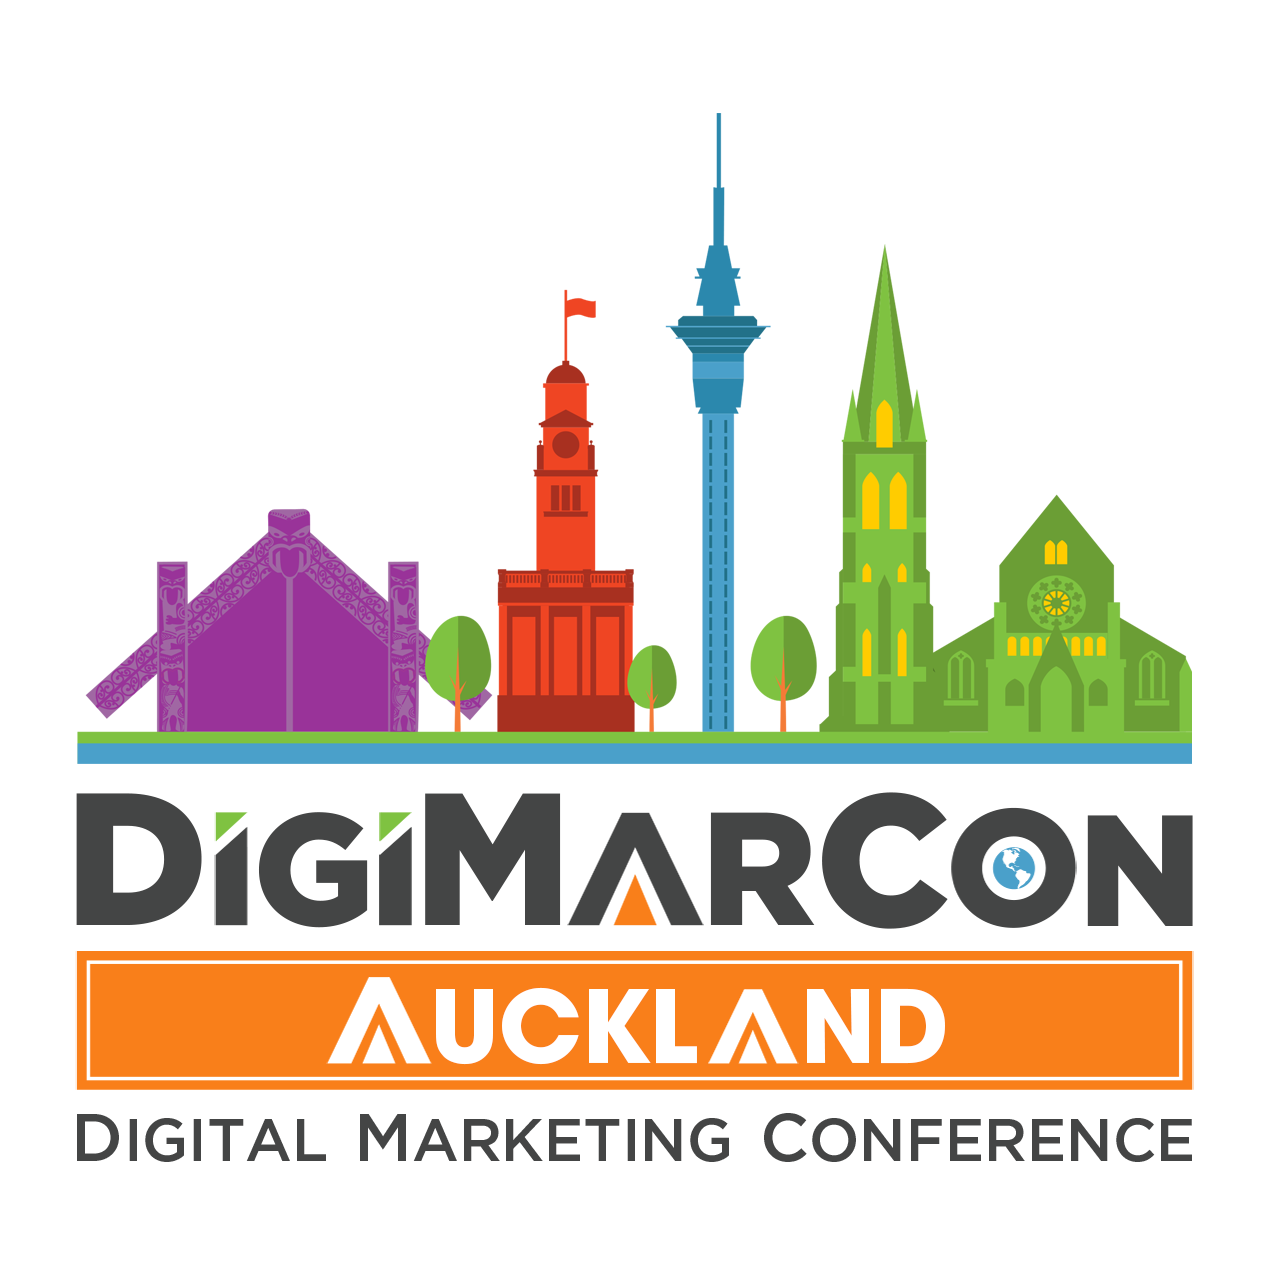 DigiMarCon New Zealand 2024 - Digital Marketing, Media and Advertising Conference & Exhibition